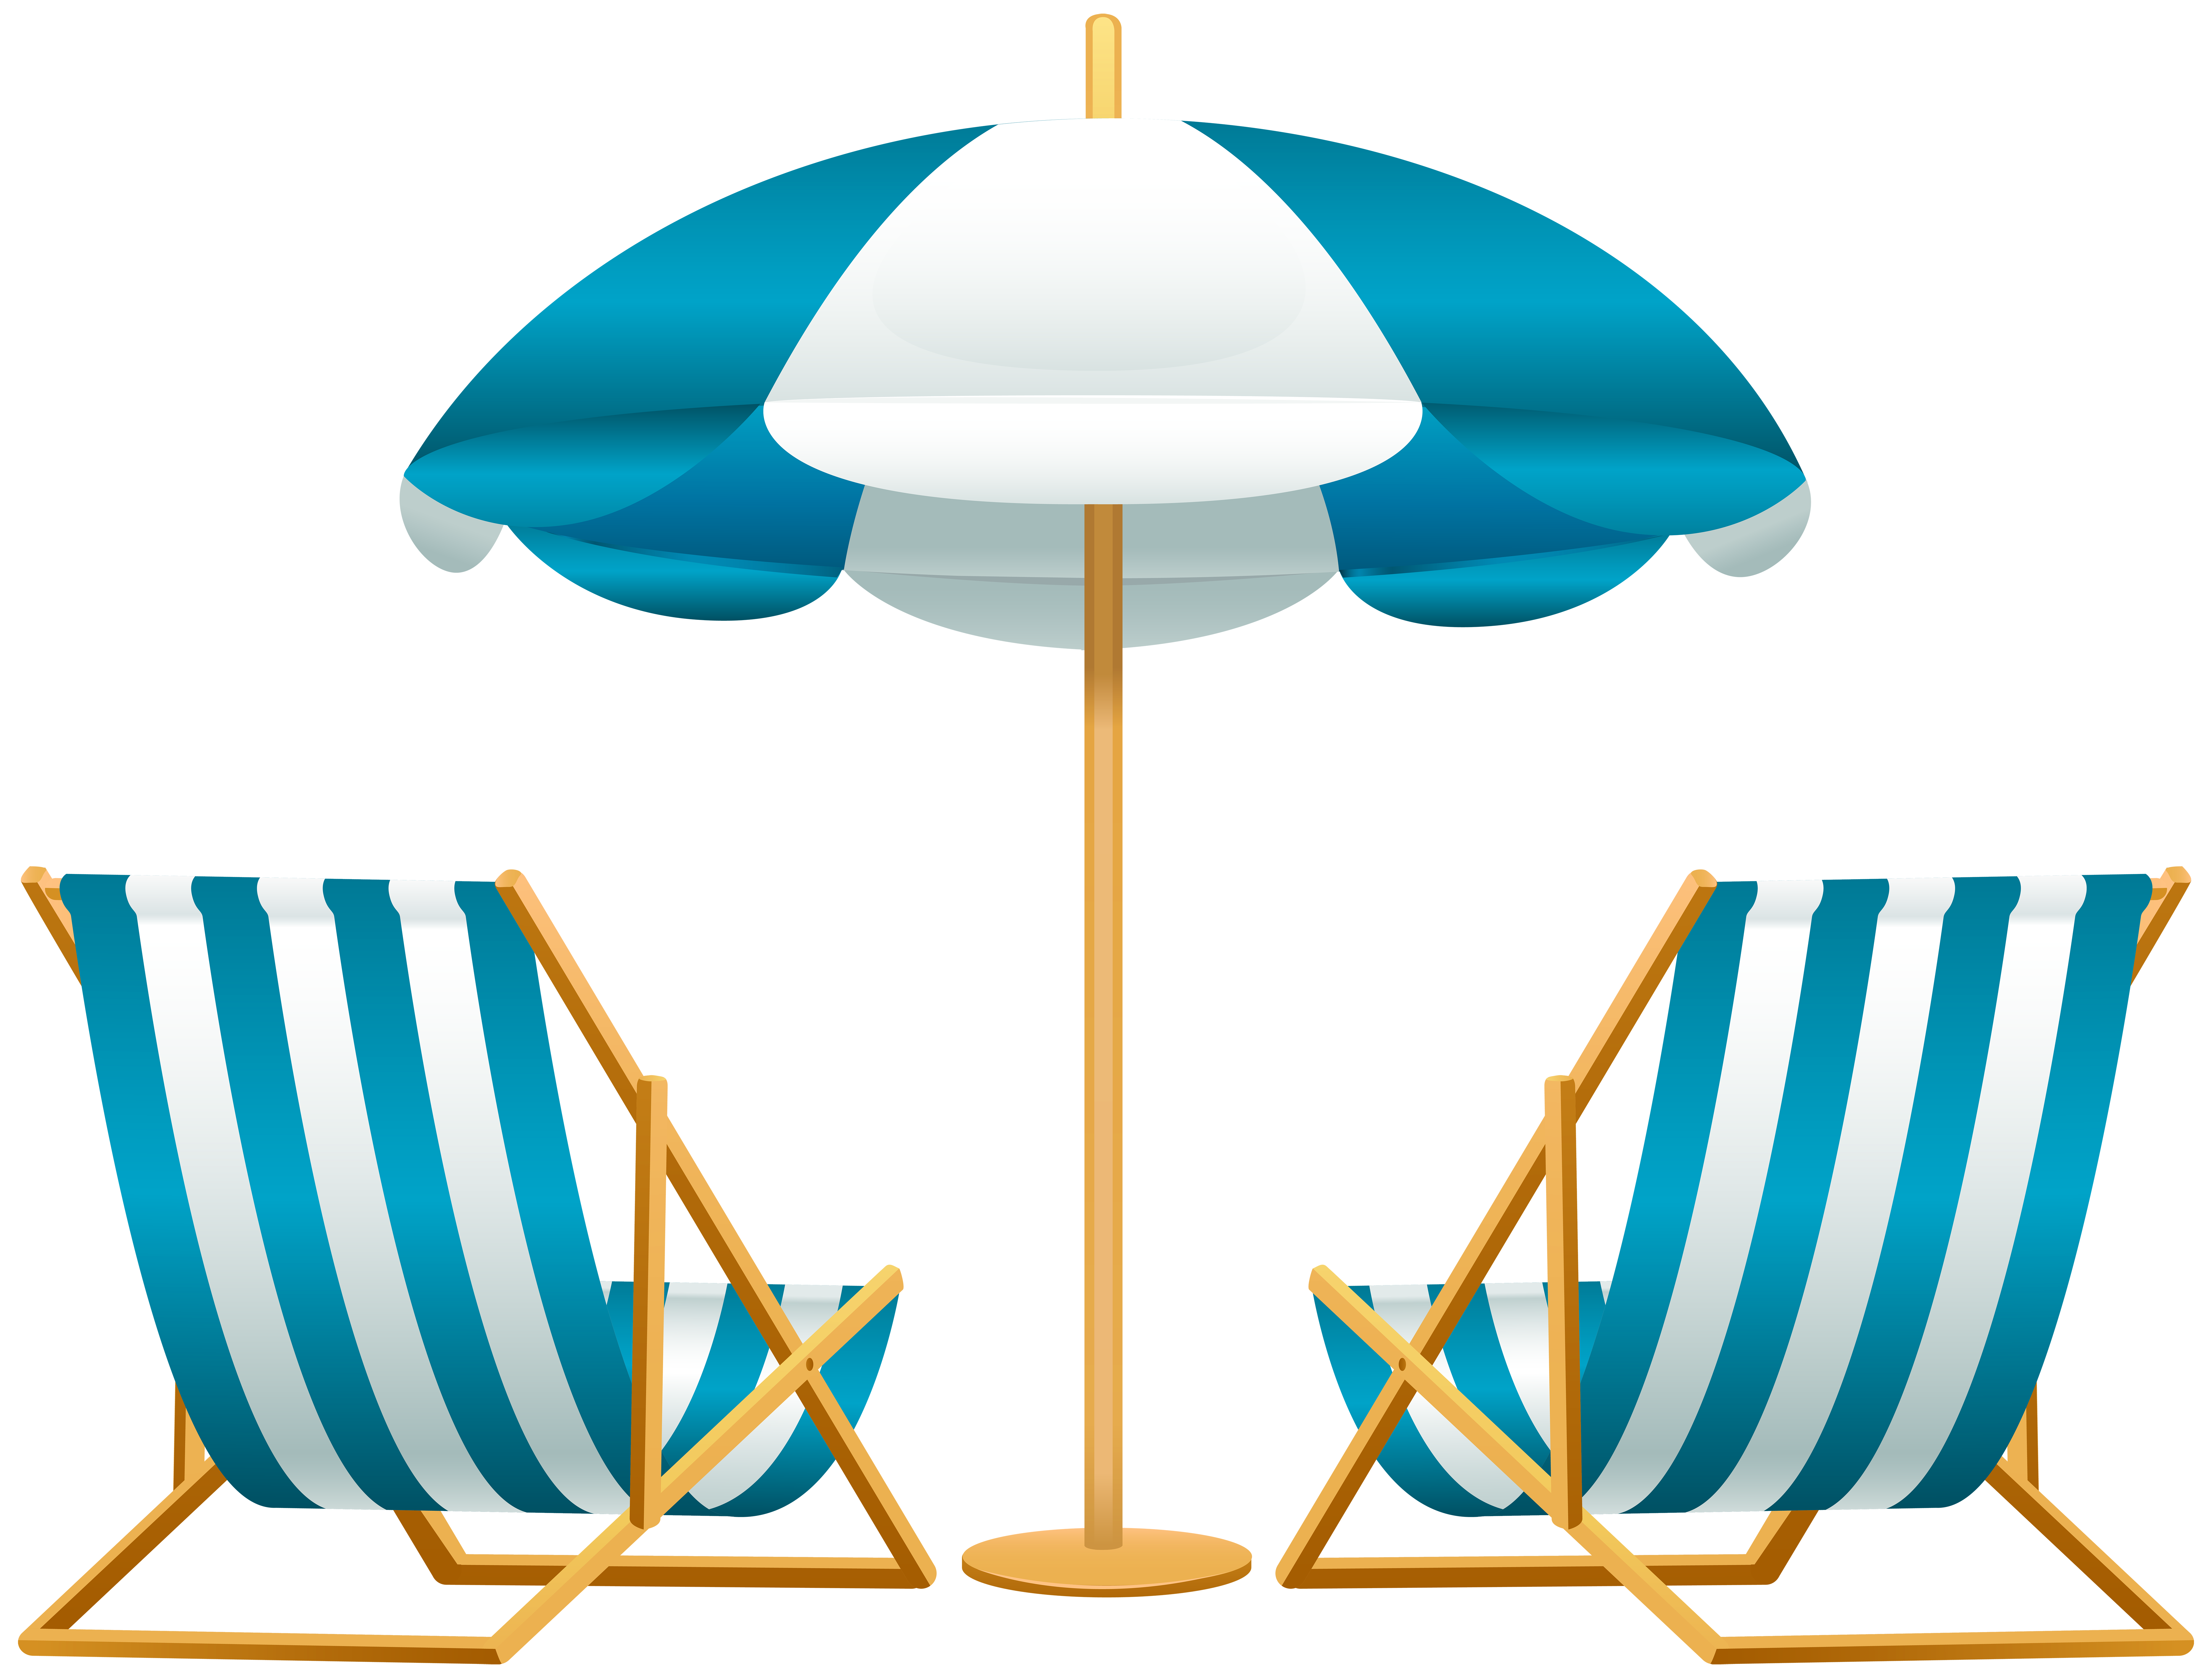 Beach Umbrella with Chairs Free PNG Clip Art Image